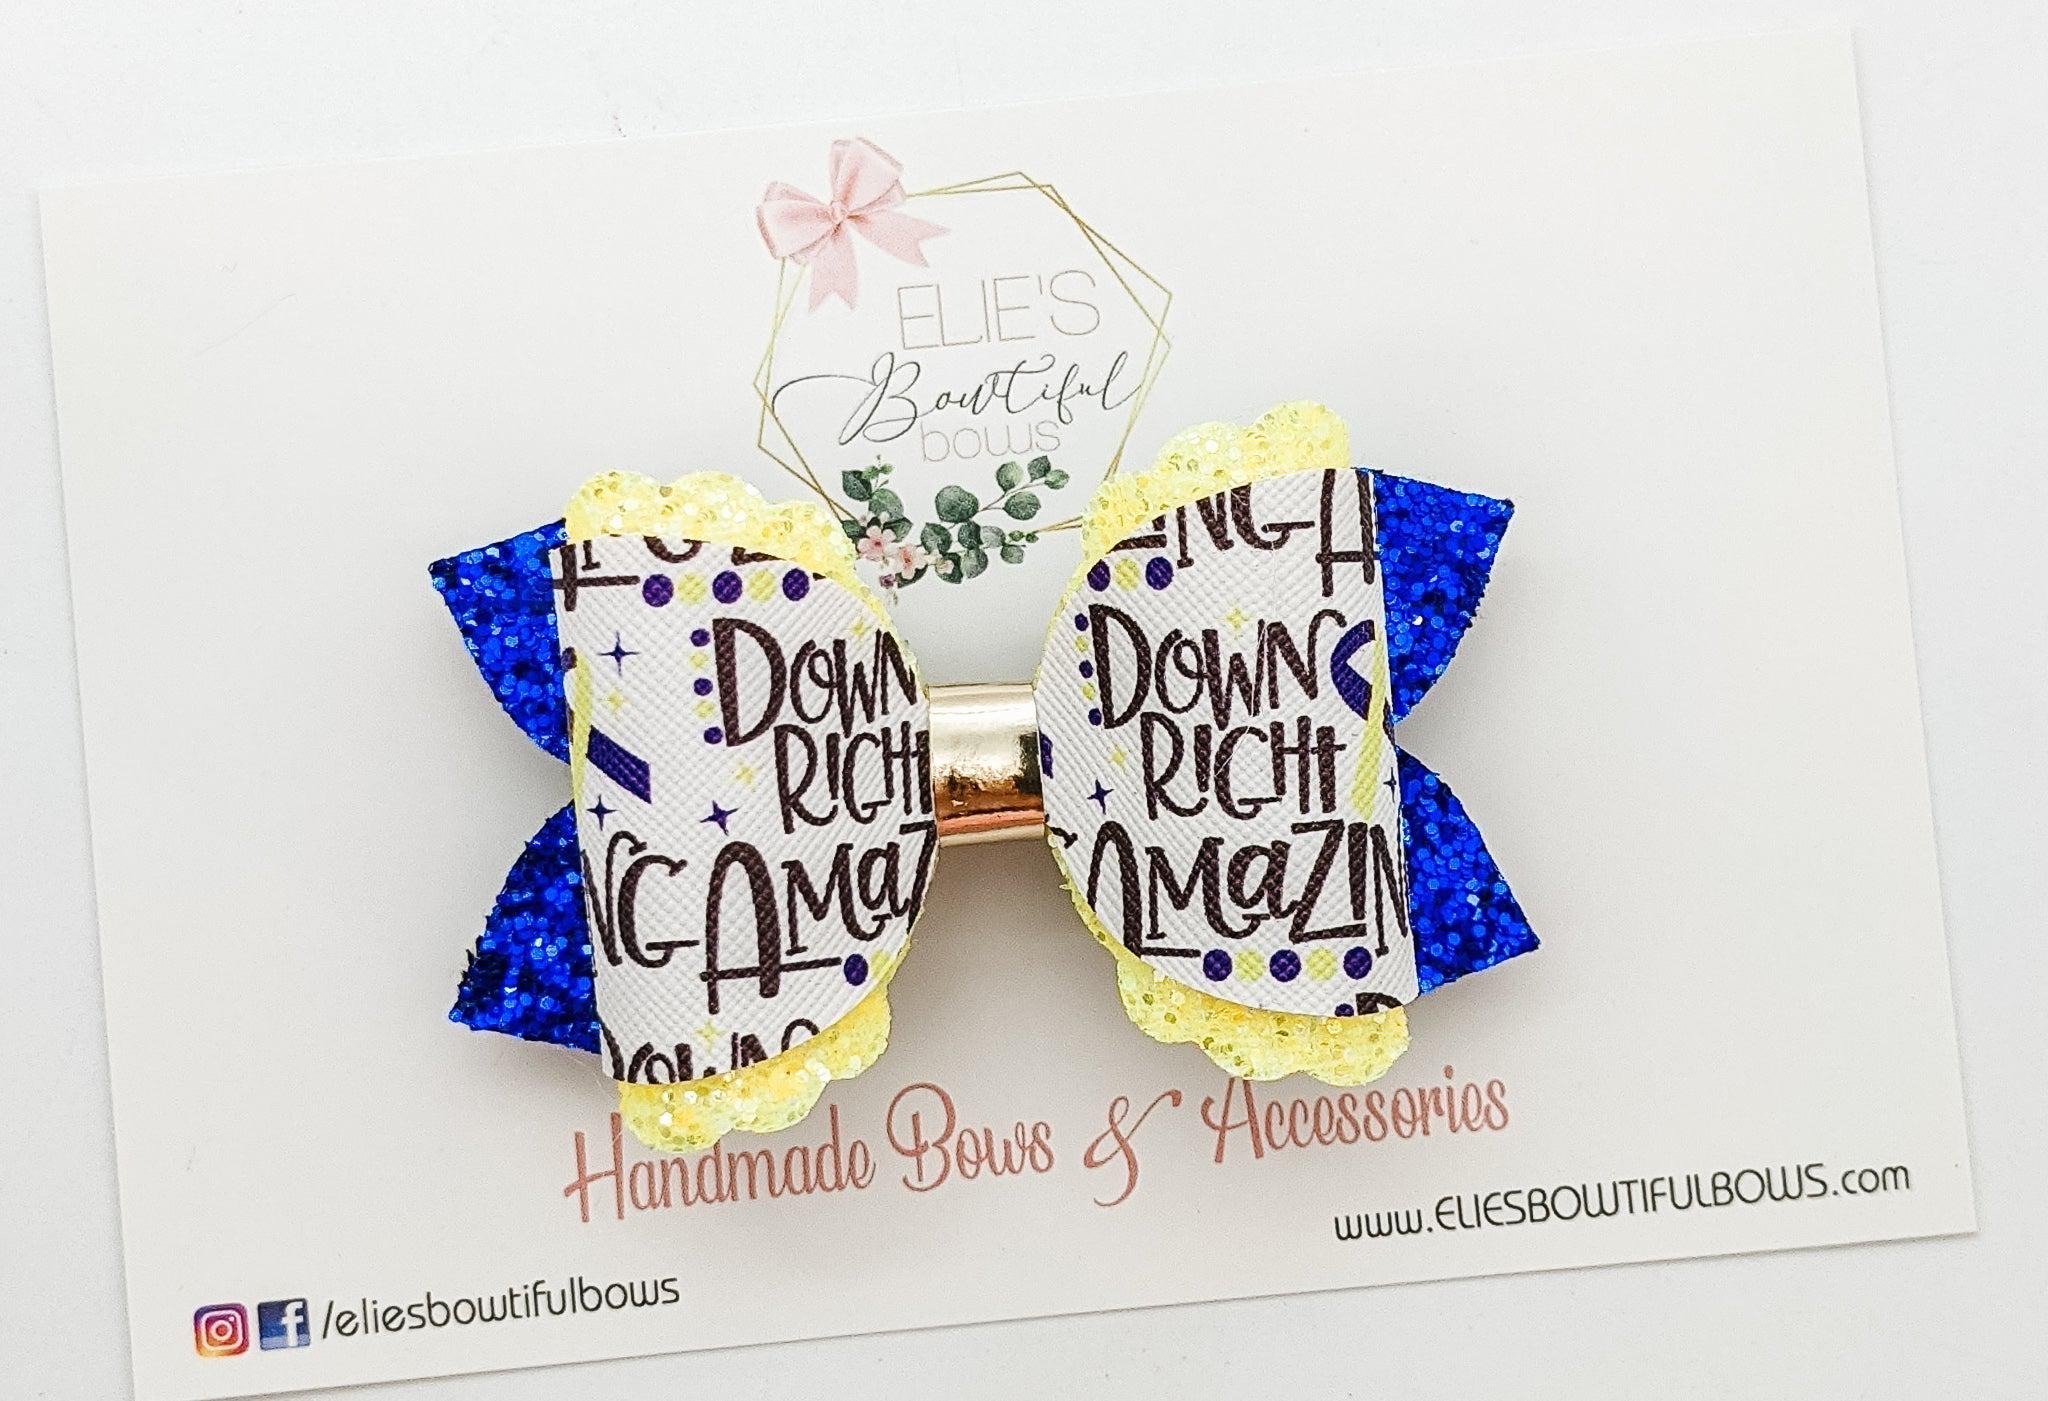 Down Right Amazing (all proceeds will be donated) - 3.5"-Bows-Elie’s Bows